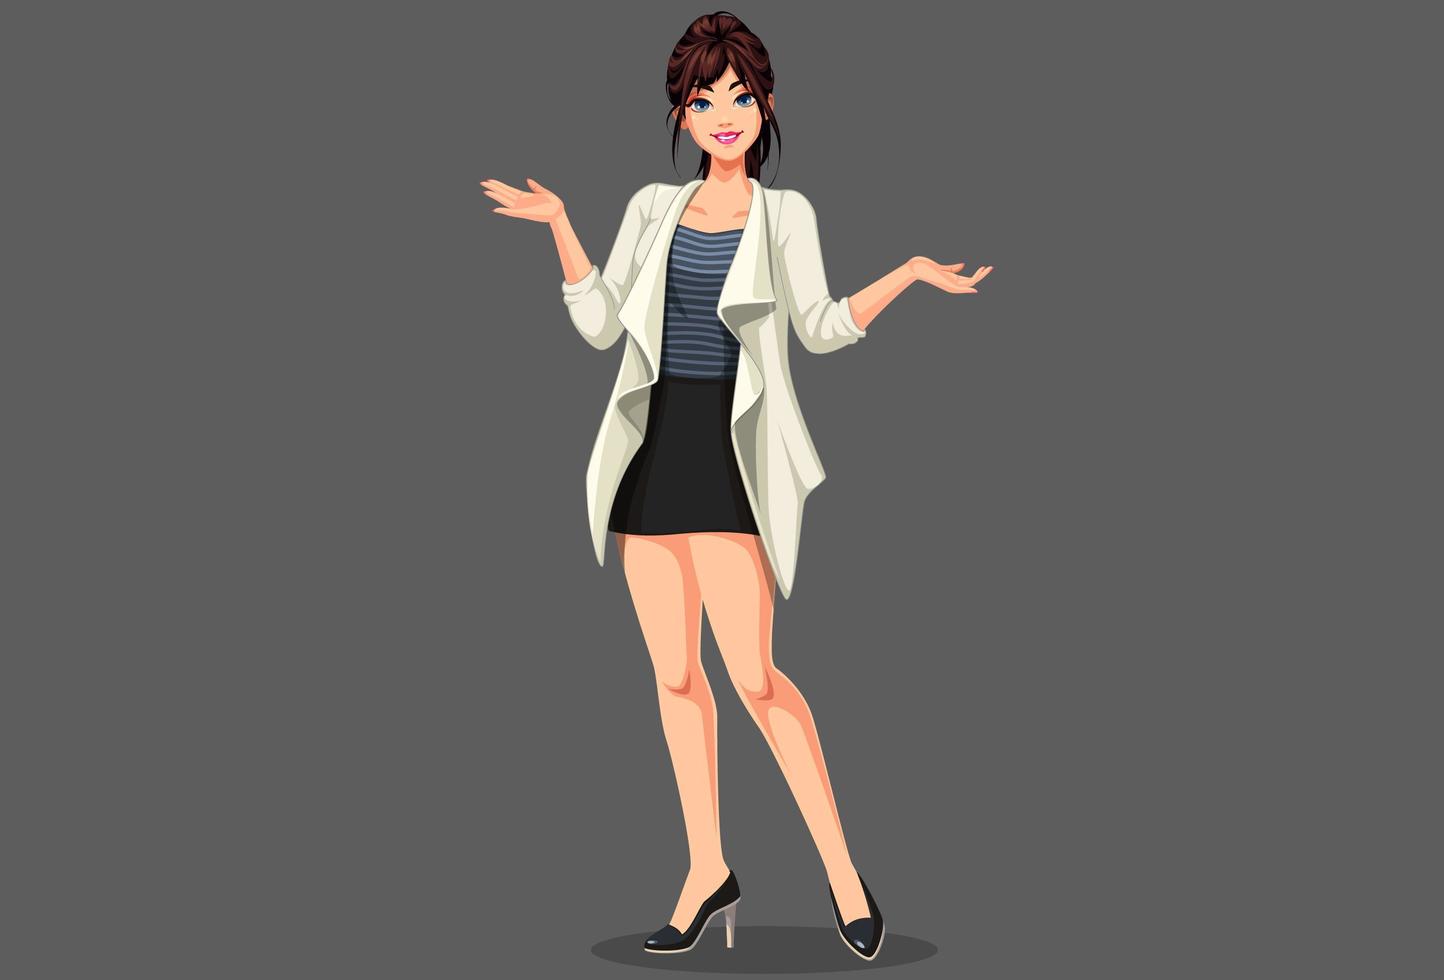 Stylish young woman vector